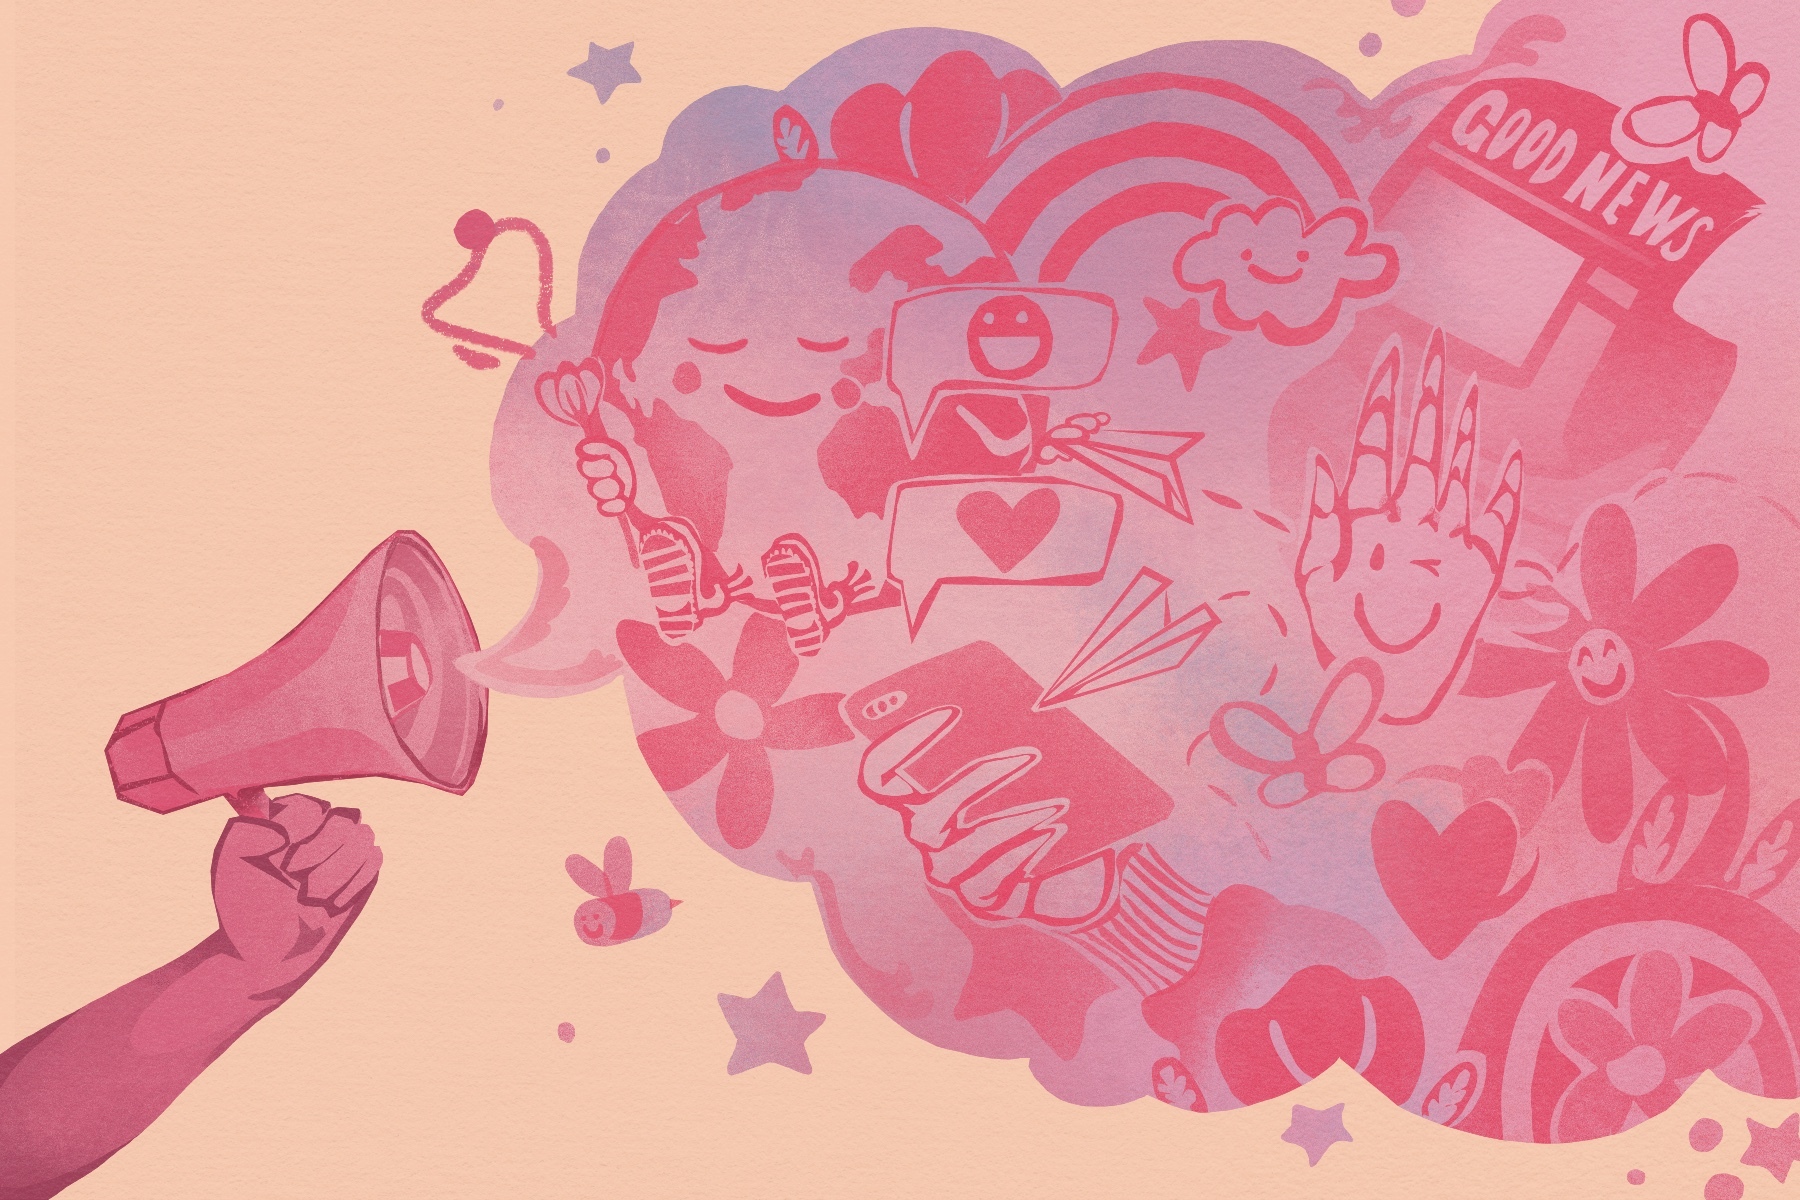 A hand holds a megaphone, from which a large speech bubble filled with images representing positive news emerges. These images include flowers, rainbows, a smiling Earth, bees, stars, and a hand holding a phone, sending texts with a heart and smiley face emoji. Everything is in hues of pink.